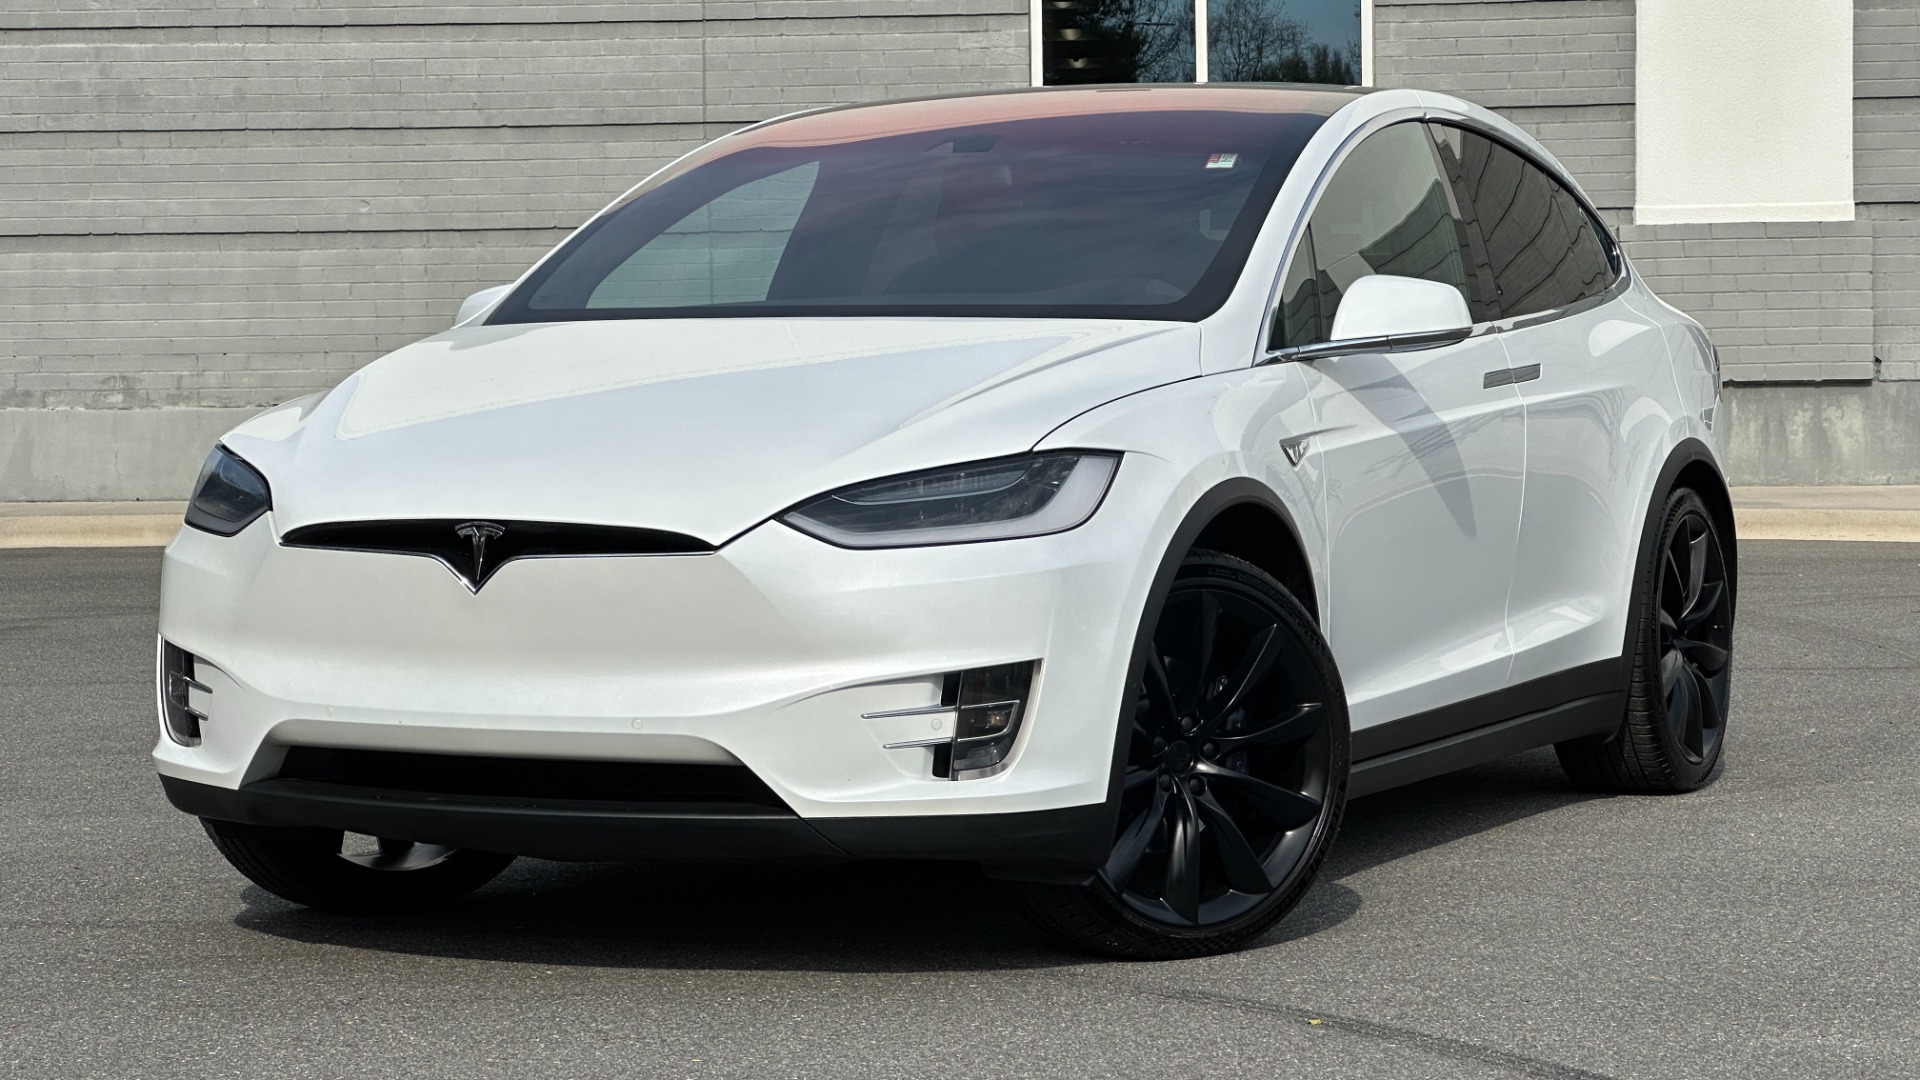 Used 2016 Tesla Model X 90D / HIGHWAY AUTOPILOT / LEATHER / 3RD ROW / CAPTAIN CHAIRS for sale $55,400 at Formula Imports in Charlotte NC 28227 1